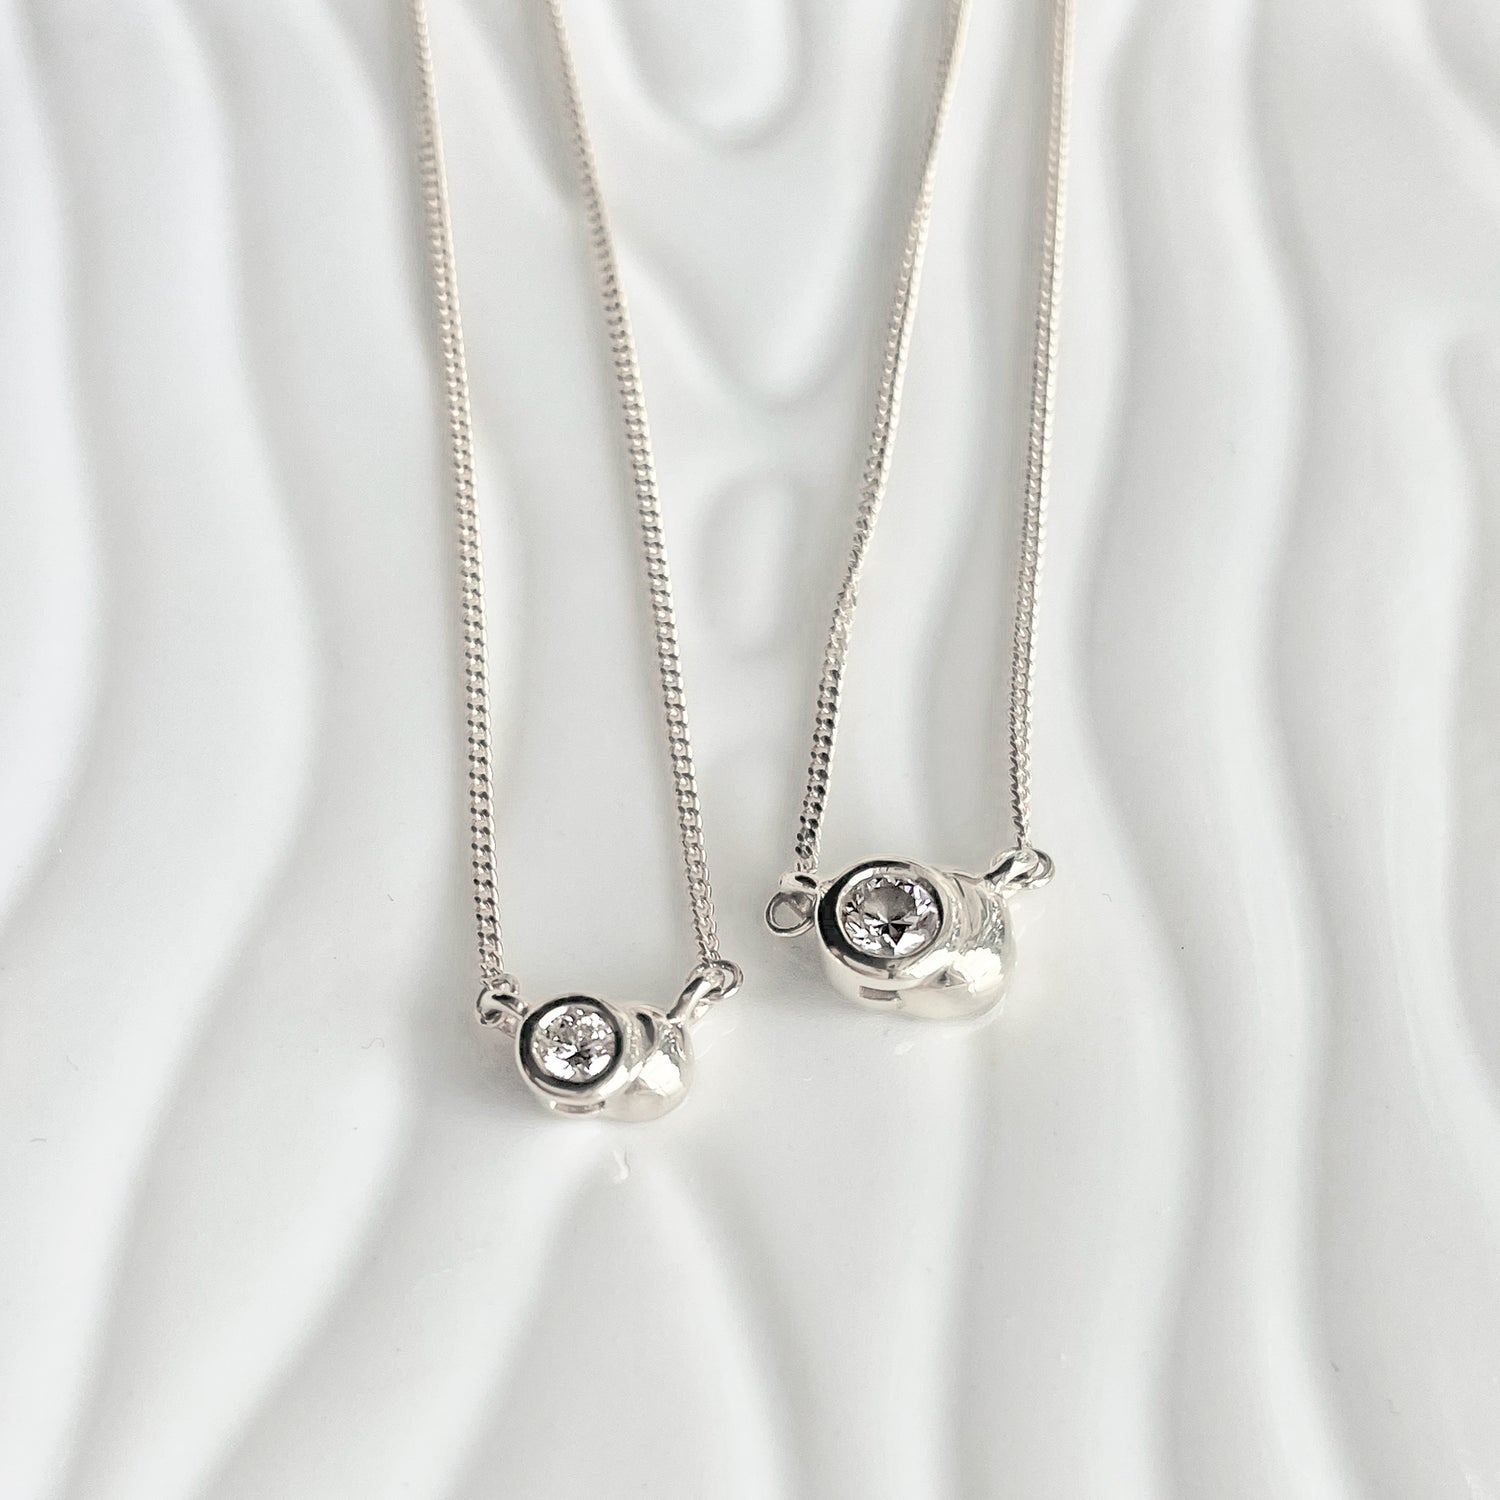 Shadow Necklace - White Gold